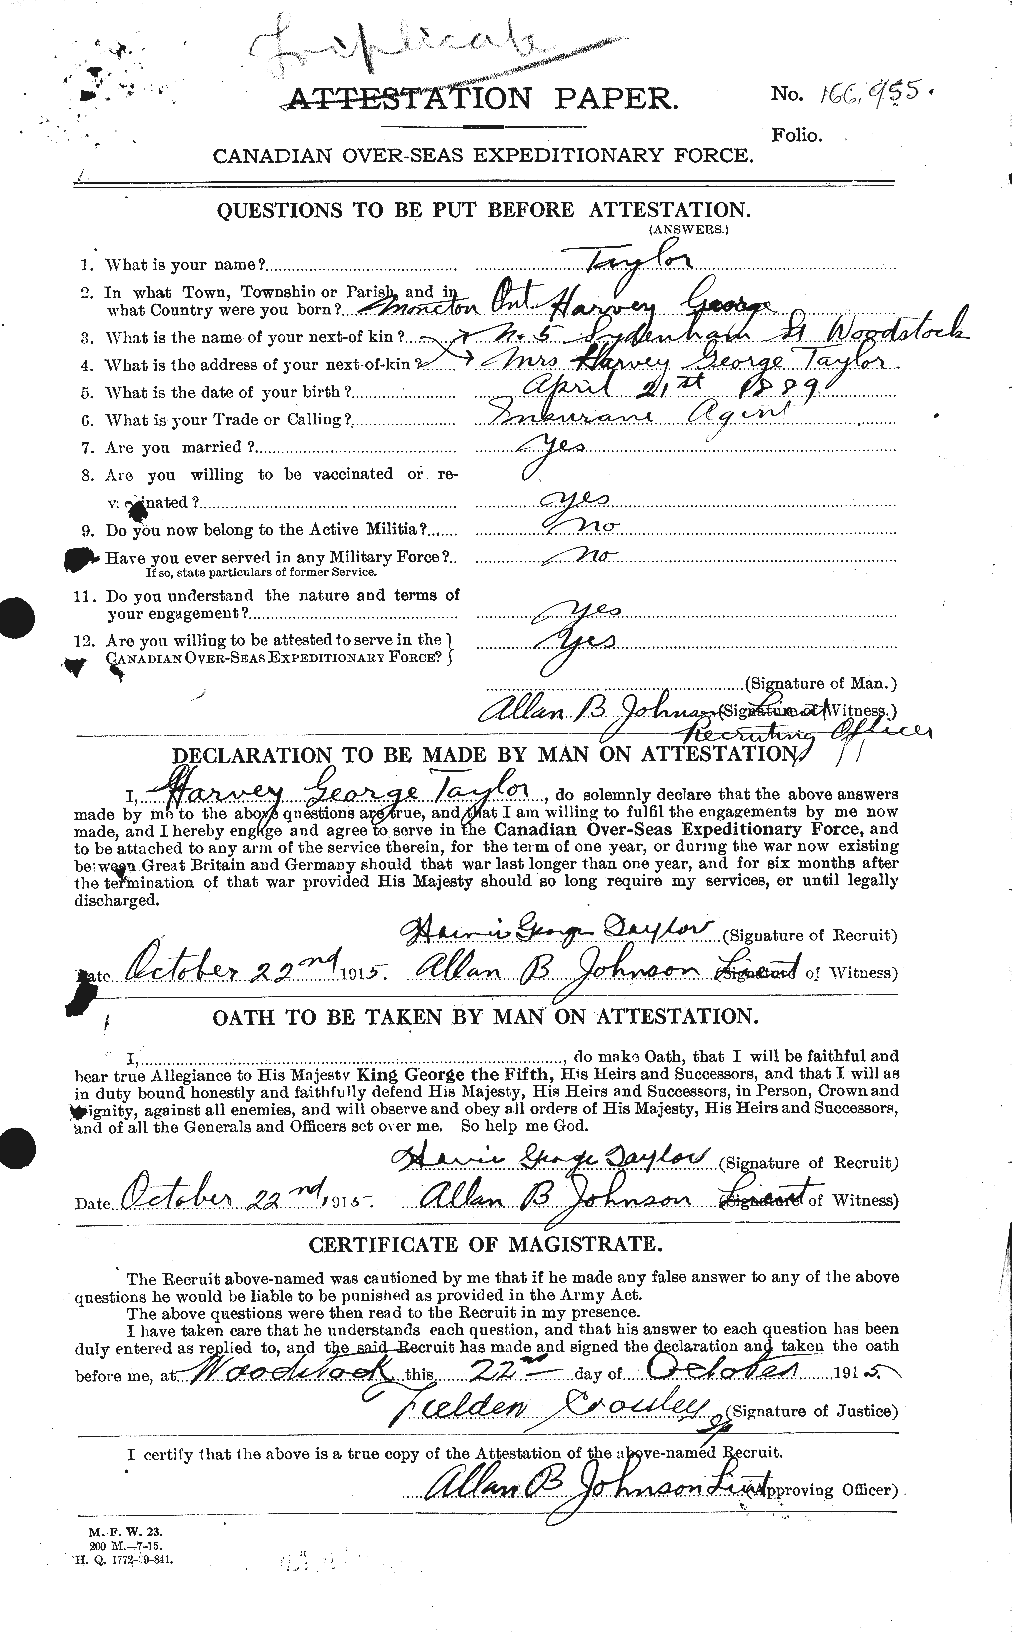 Personnel Records of the First World War - CEF 626511a